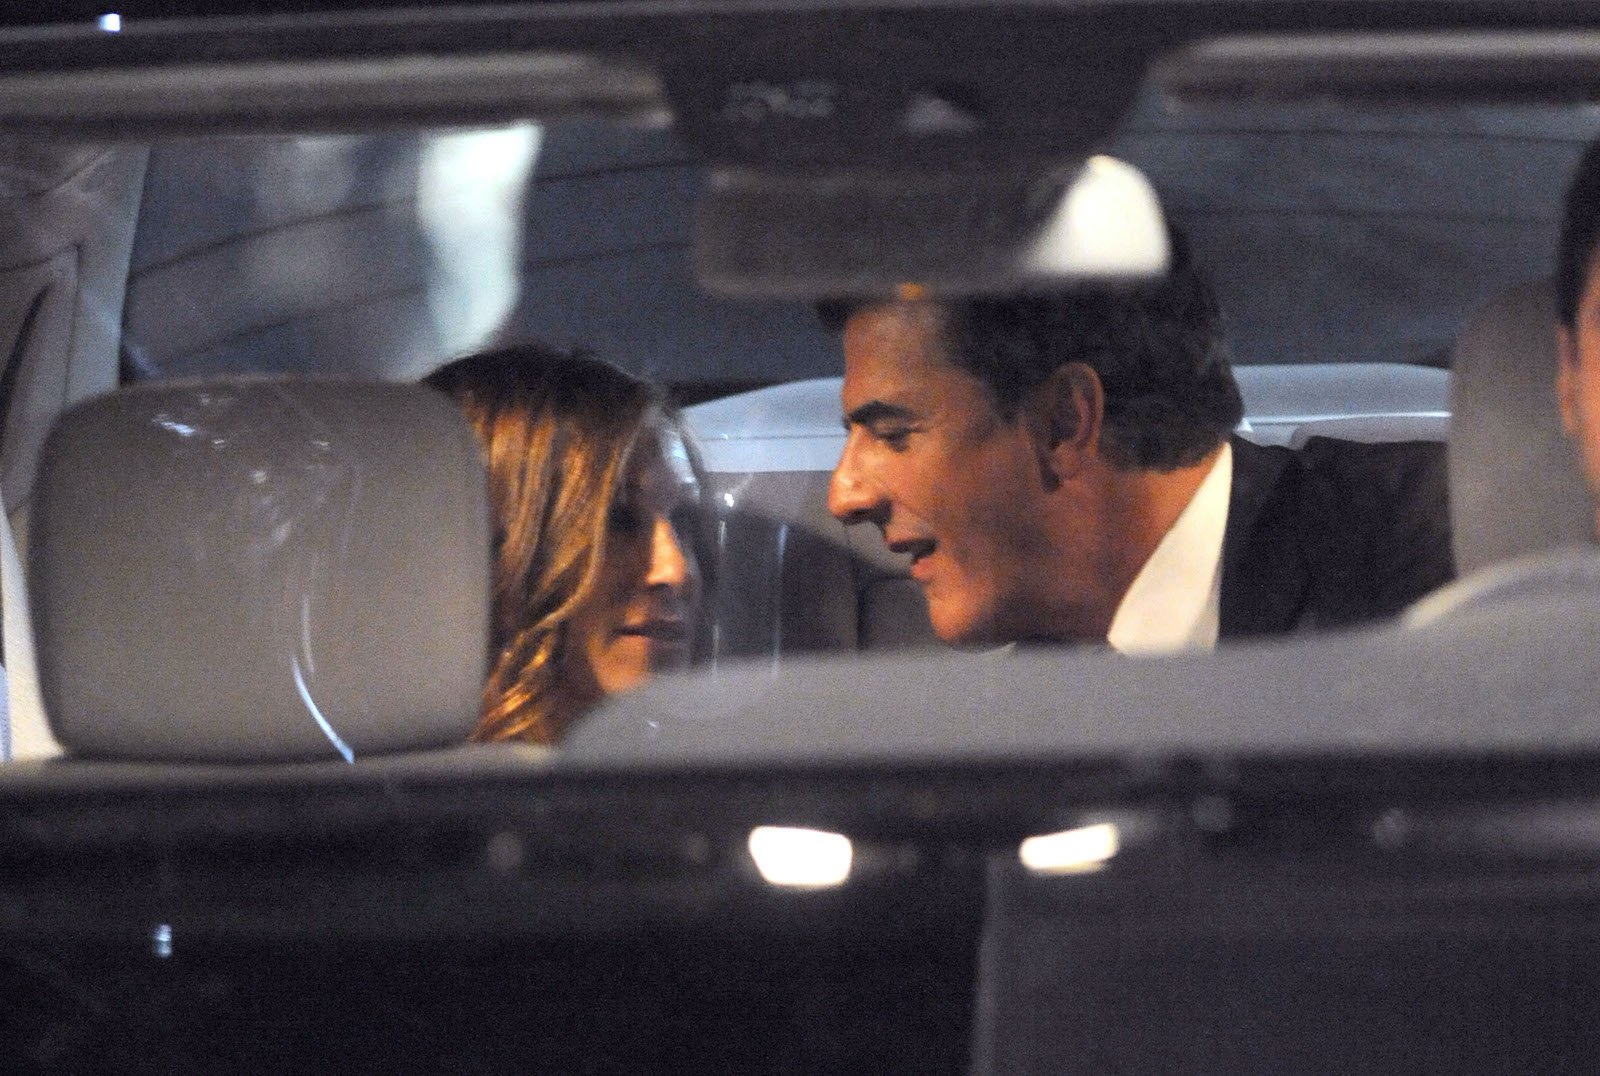 Sarah Jessica Parker and Chris Noth talk in a car on 'Sex and the City 2'